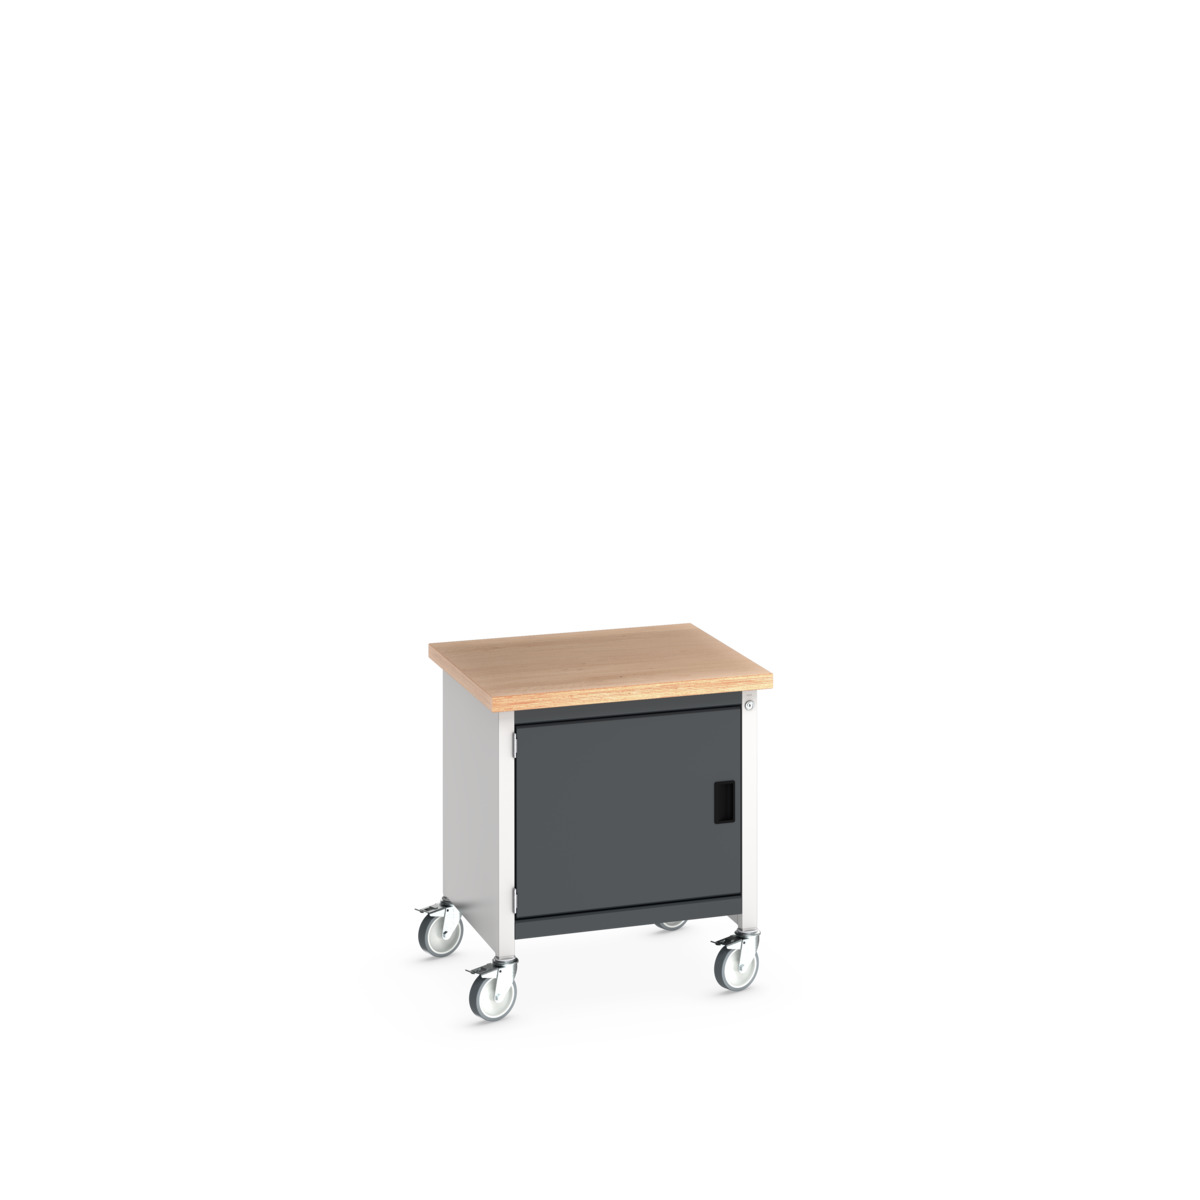 41002085.19V - cubio mobile storage bench (mpx)